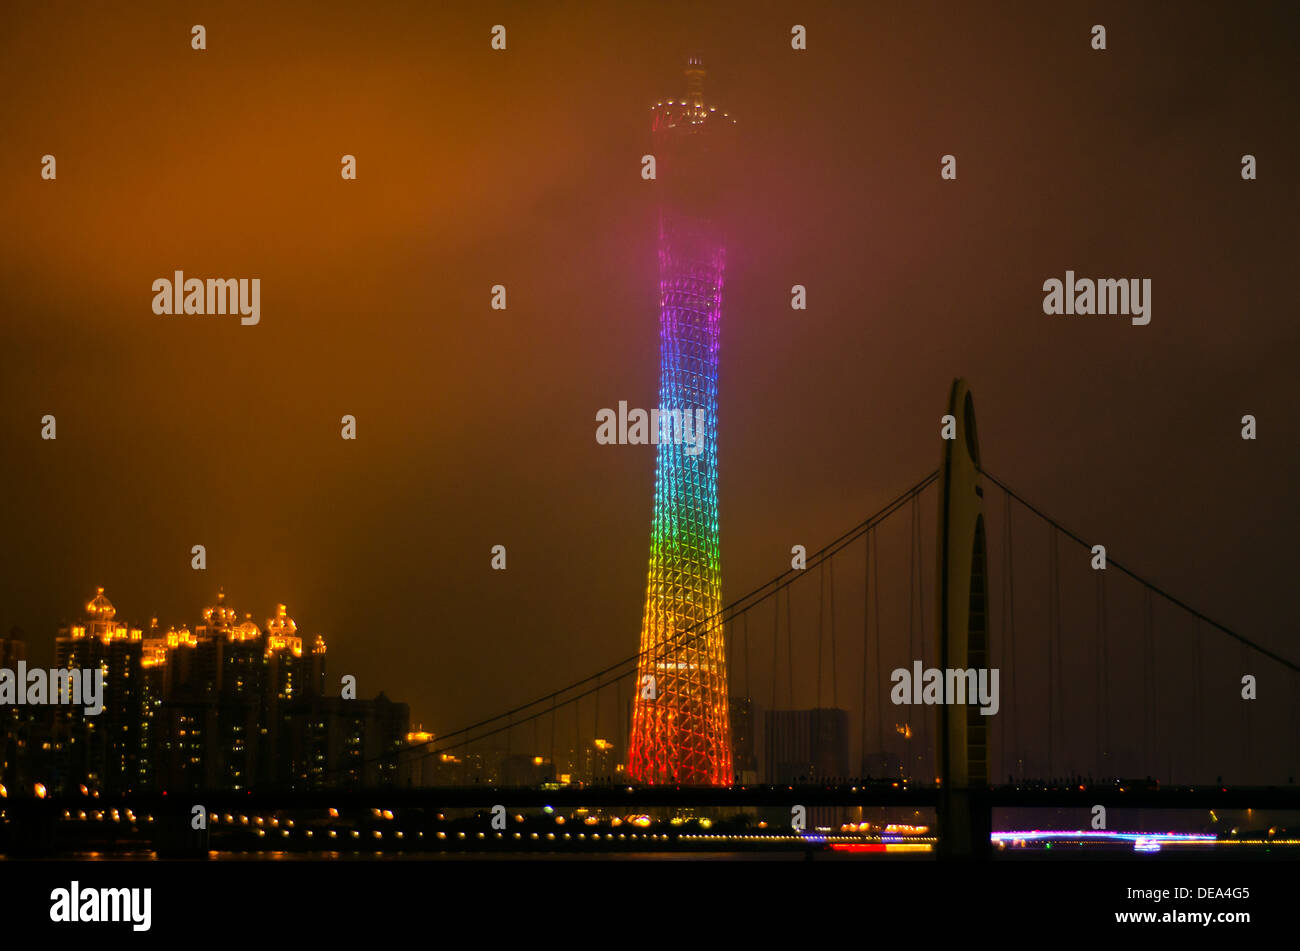 Pearl river et Guangzhou tower by night , Chine Banque D'Images